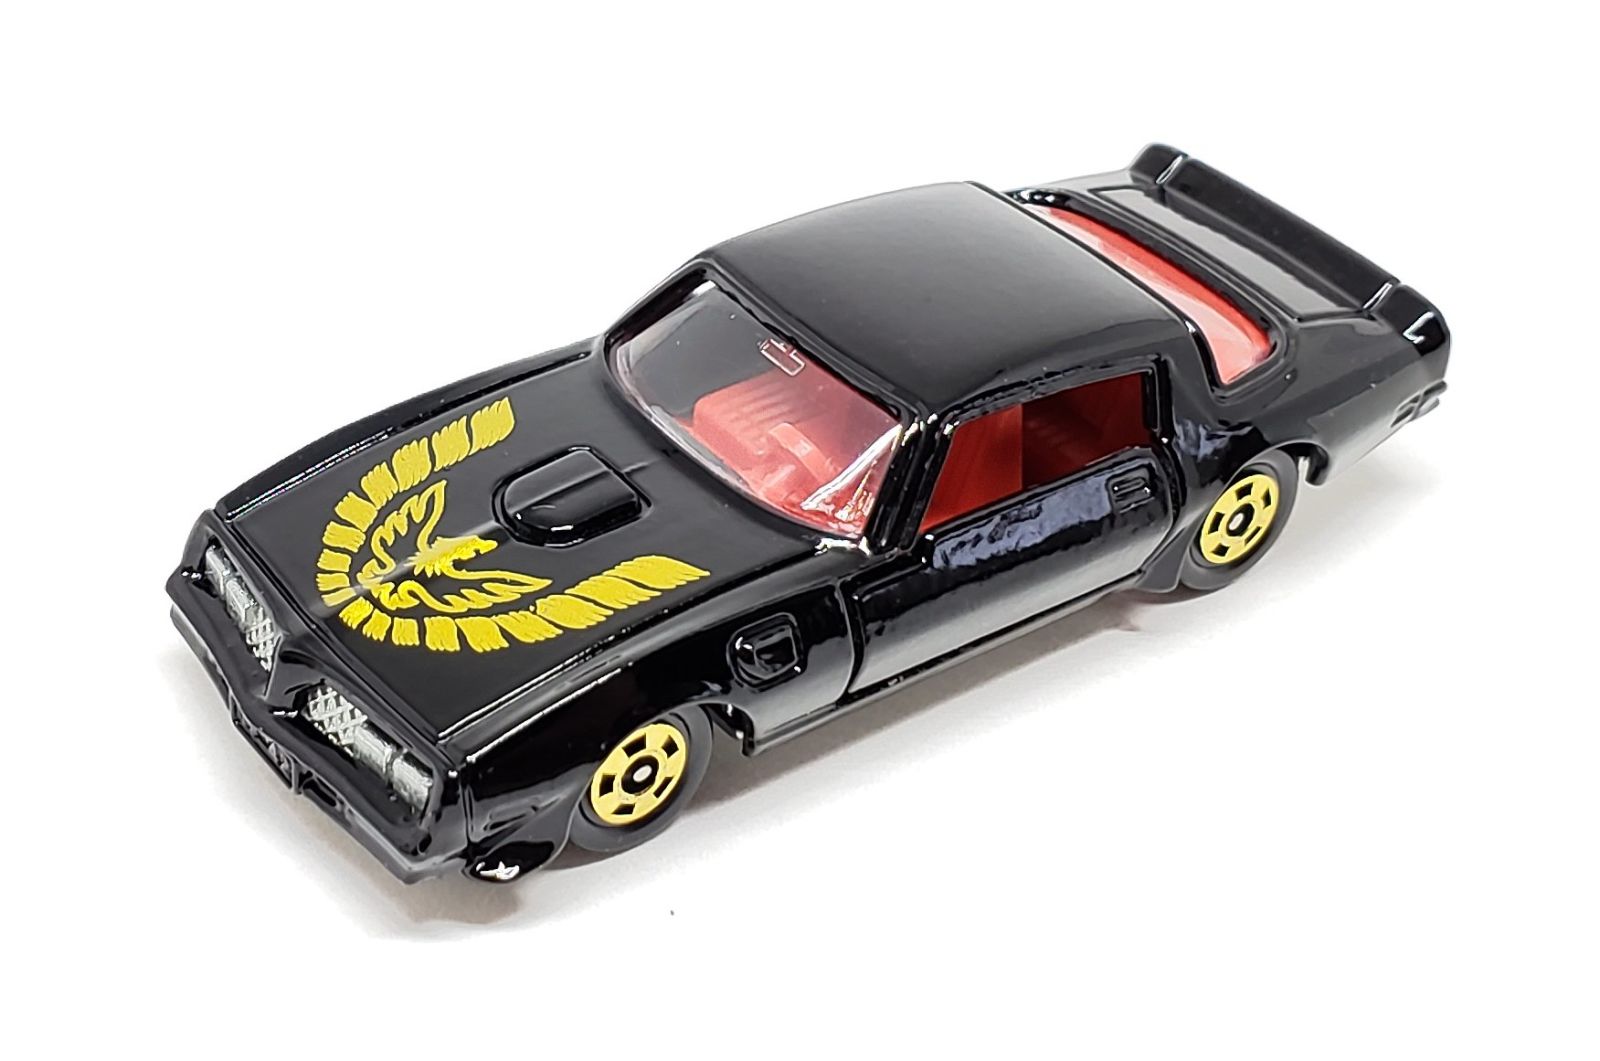 Illustration for article titled [REVIEW] Tomica Pontiac Firebird TransAm